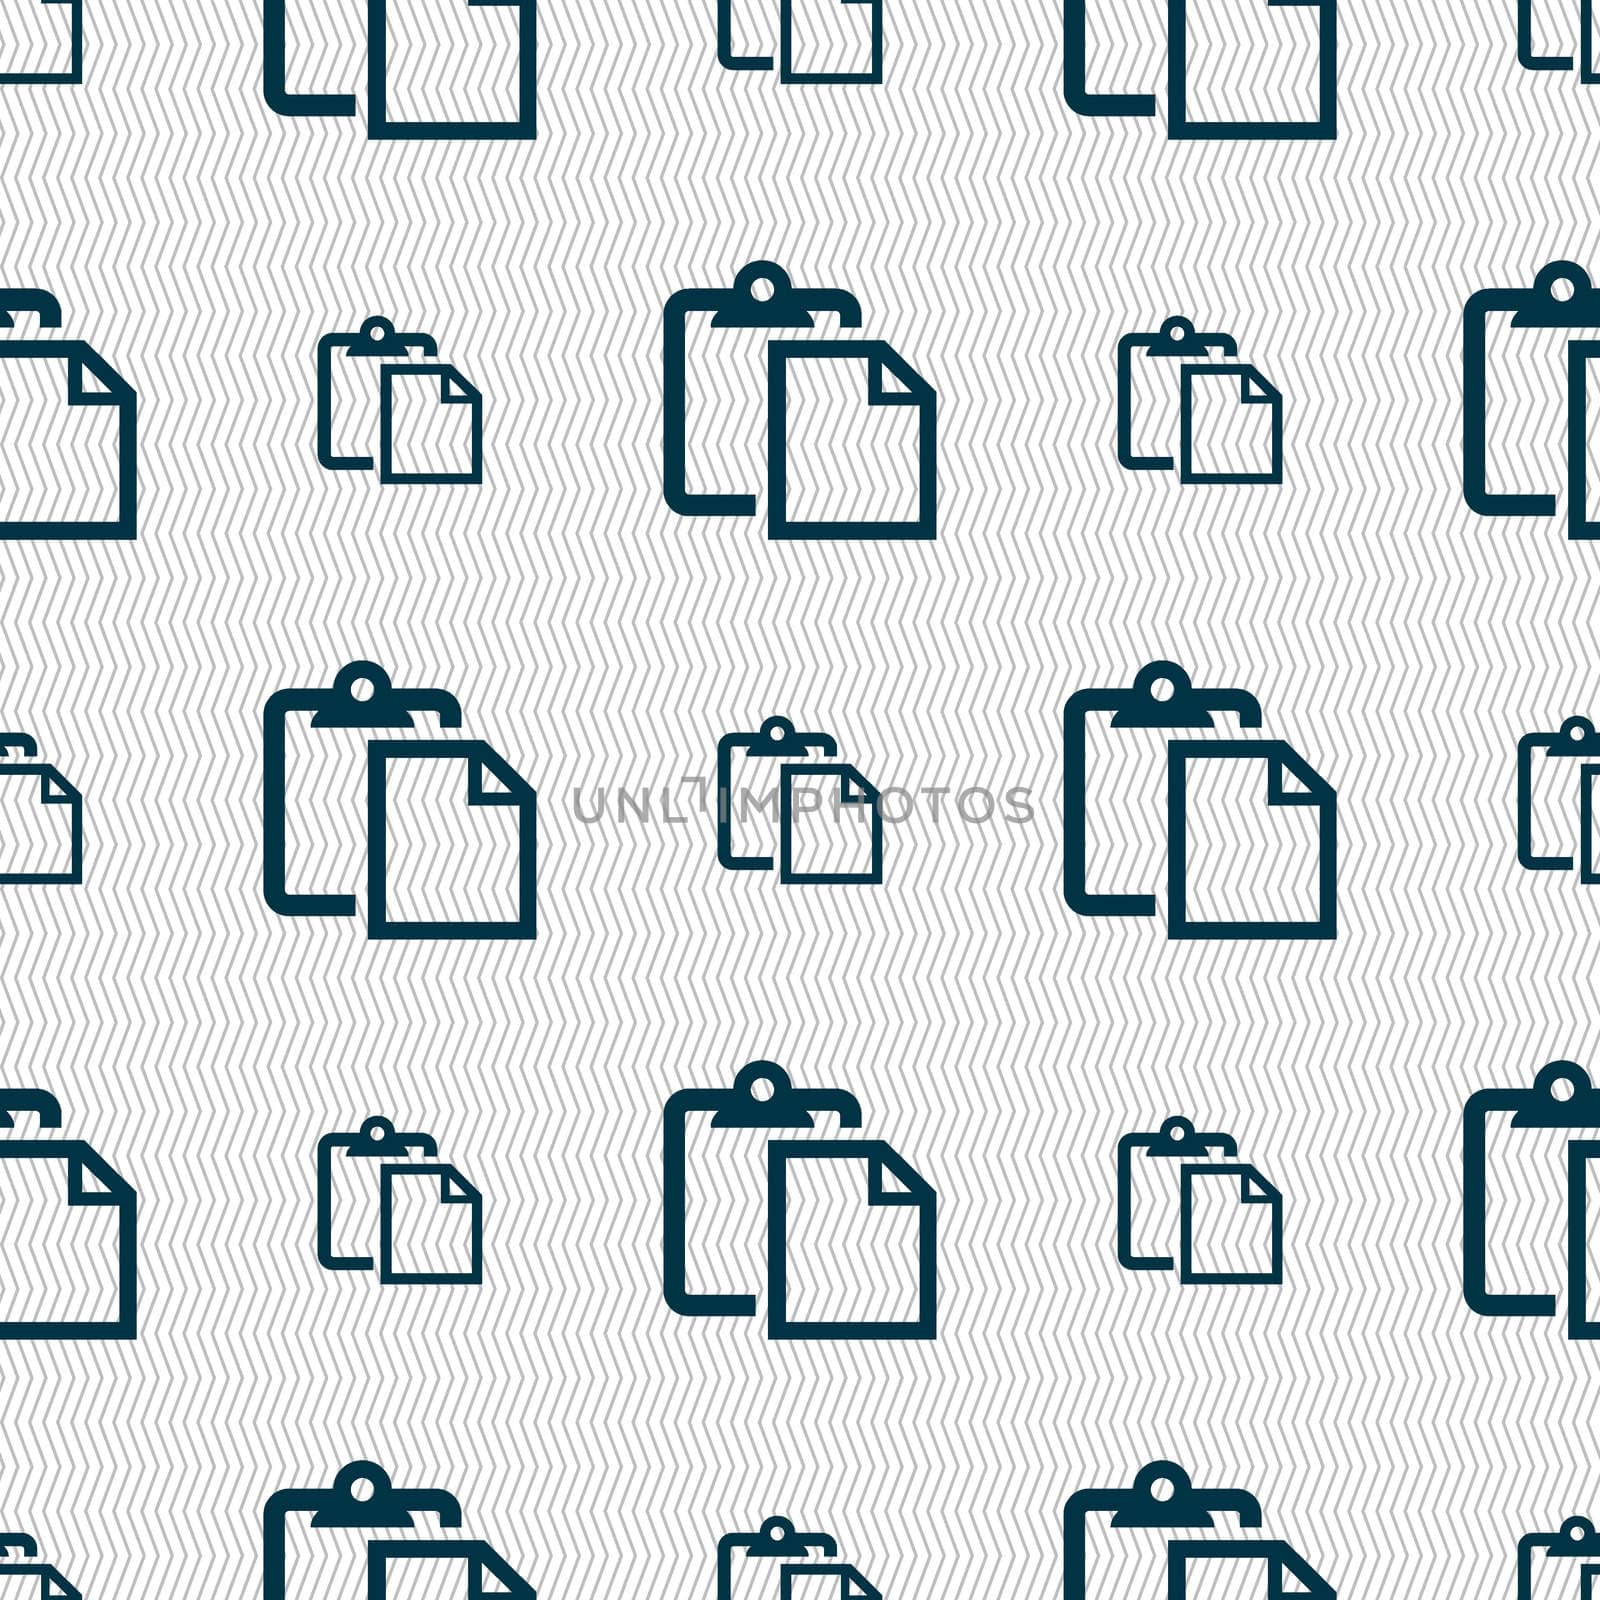 Edit document sign icon. Seamless abstract background with geometric shapes. illustration